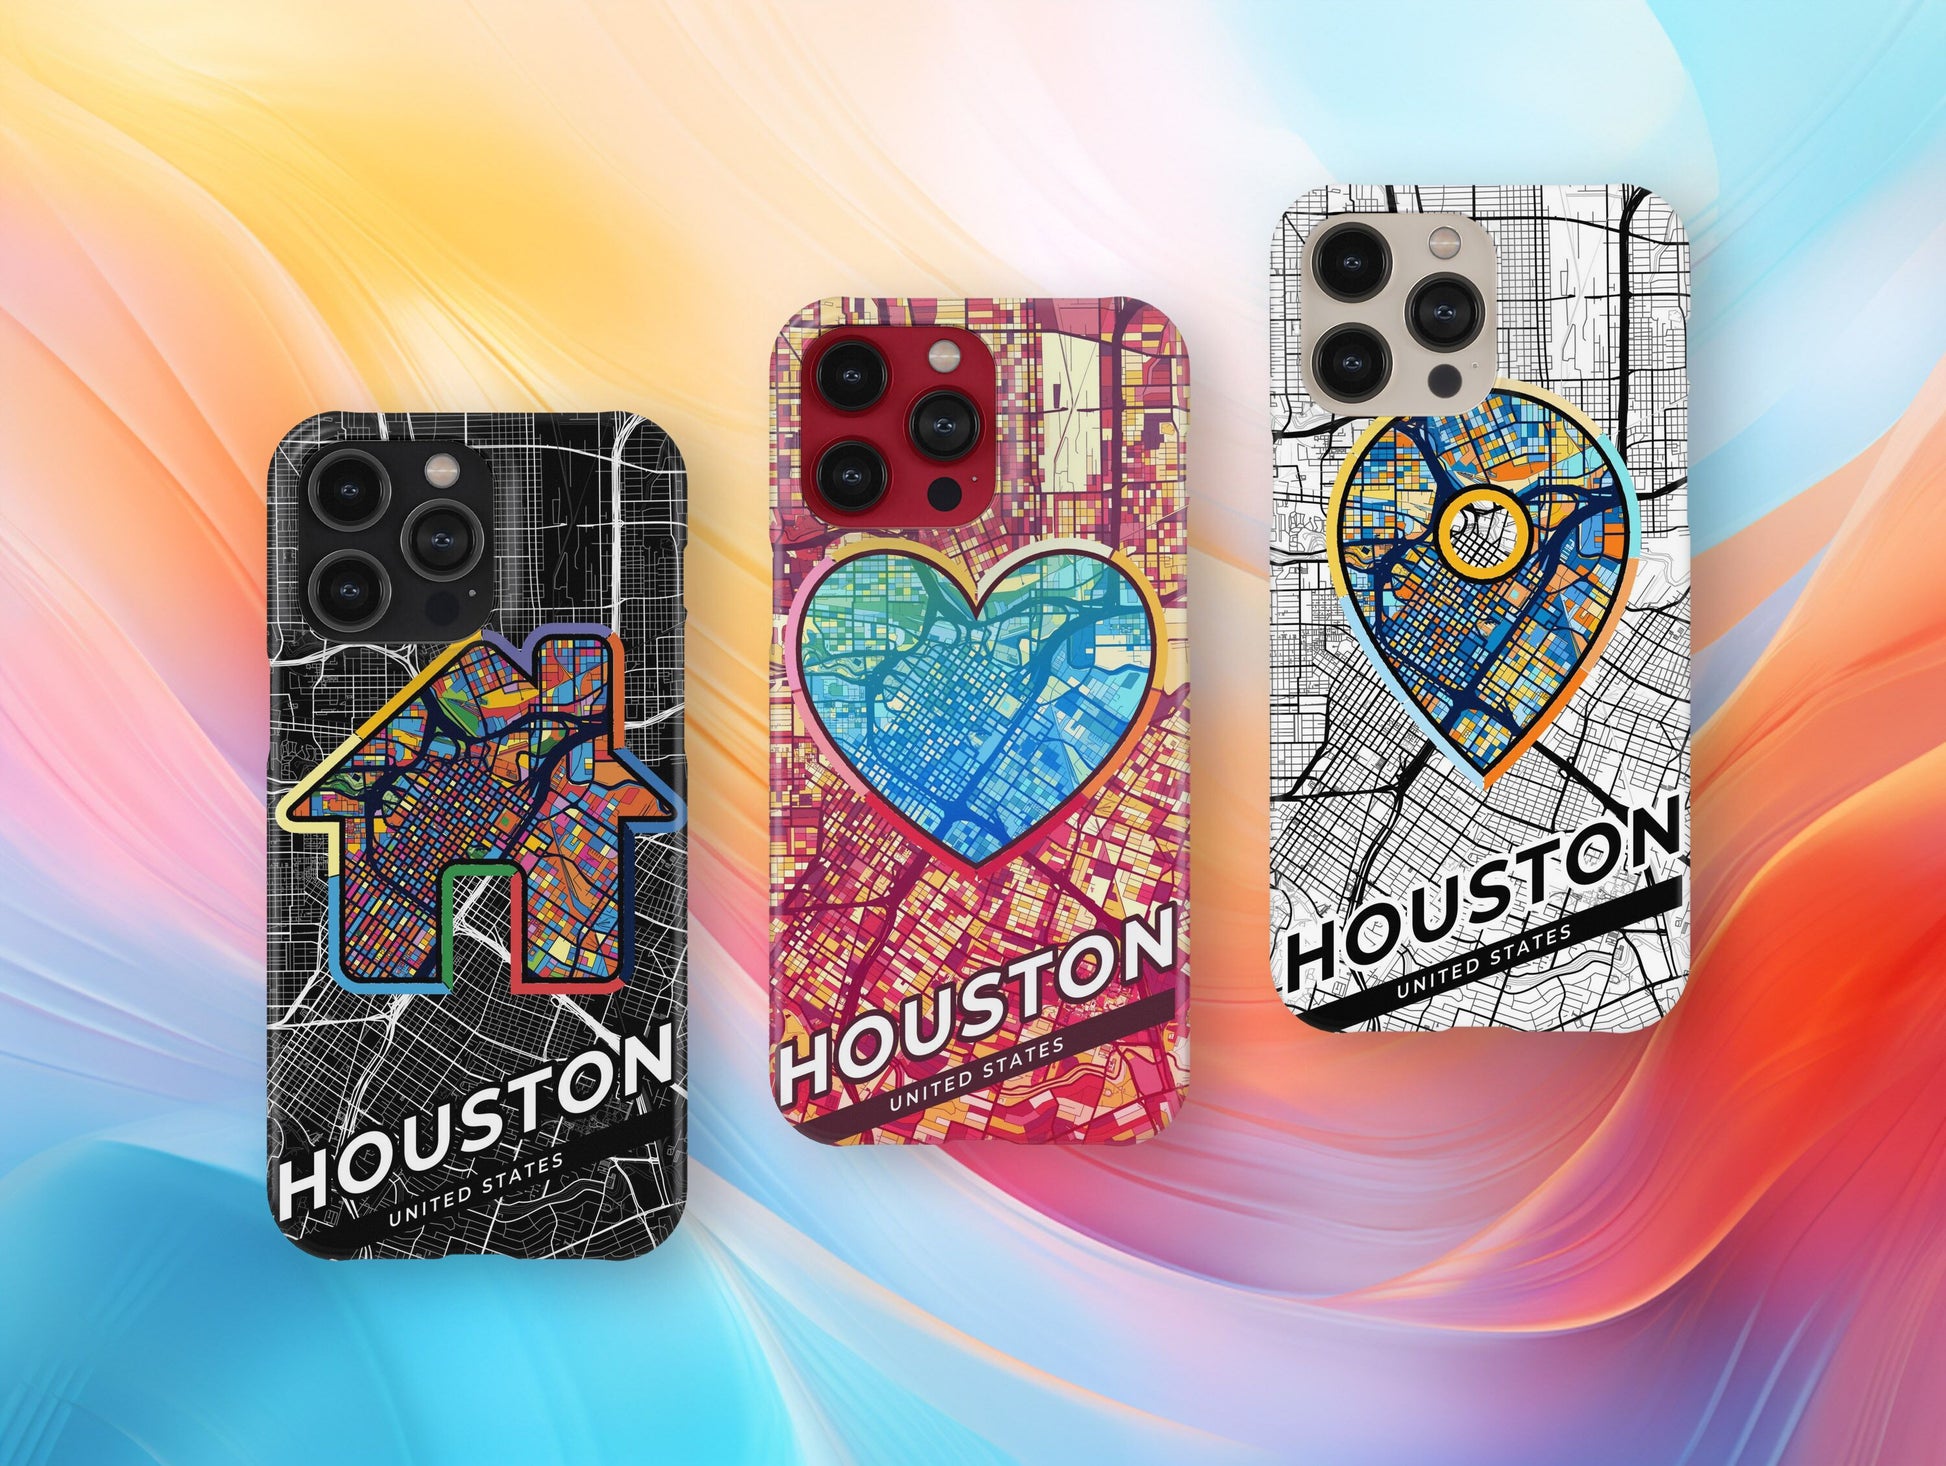 Houston Texas slim phone case with colorful icon. Birthday, wedding or housewarming gift. Couple match cases.